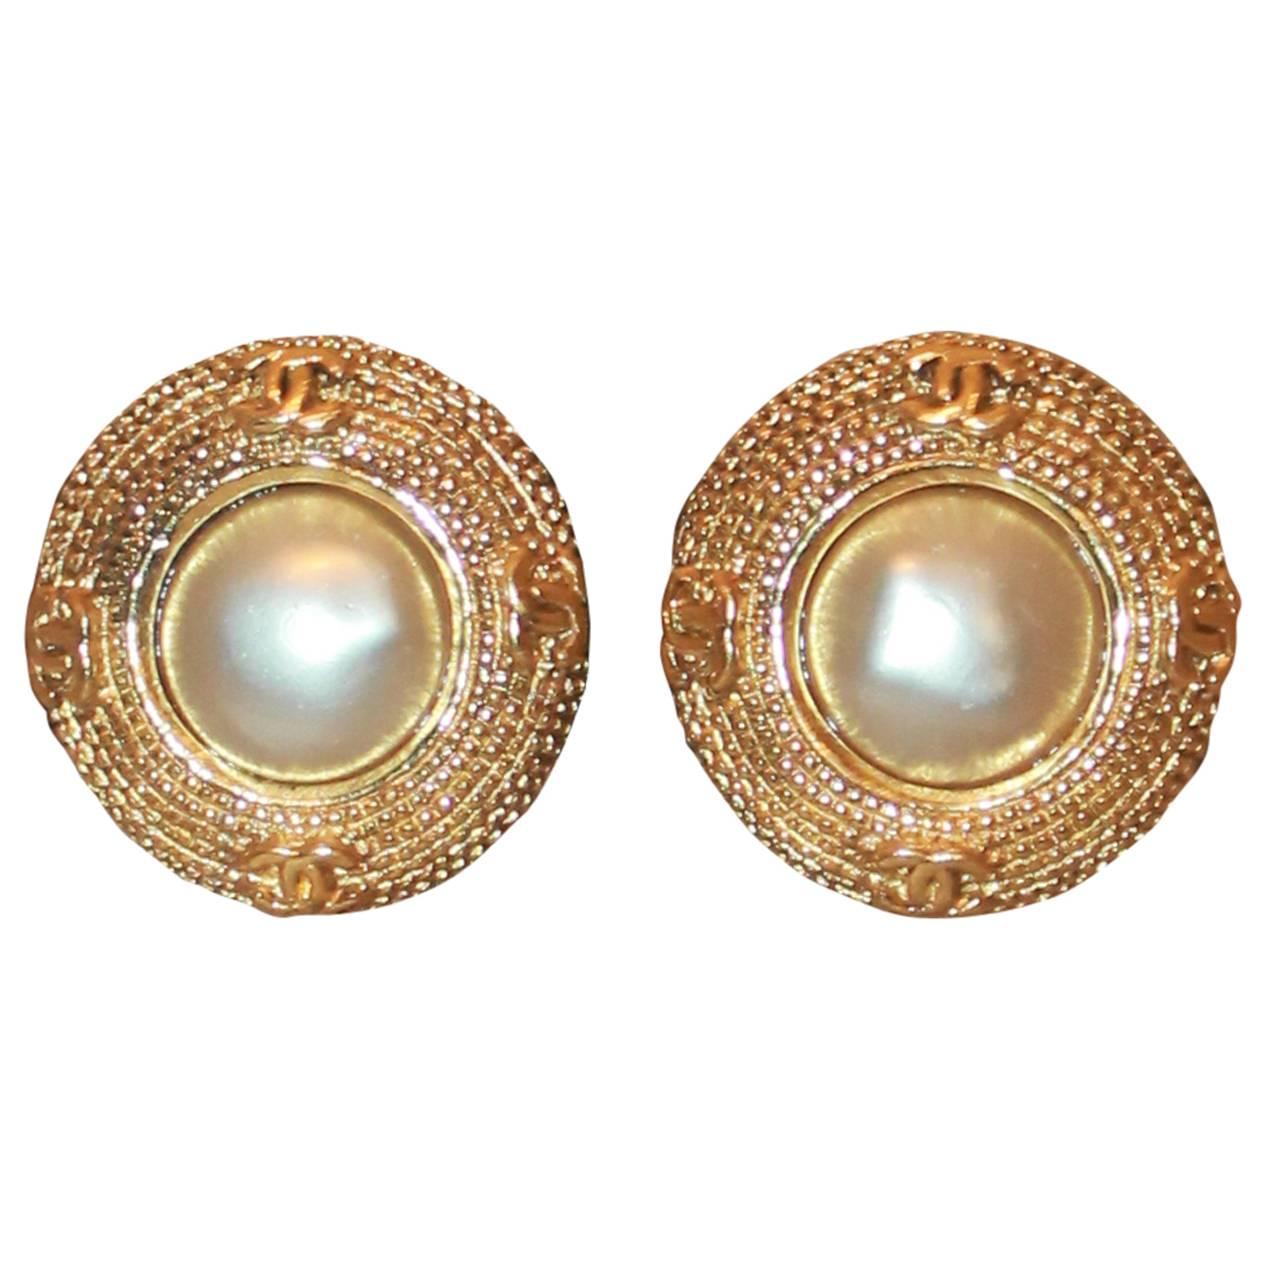 Chanel Textured Goldtone Round Clip-On Earrings w/ Pearl & 4 CC's - Circa 1989